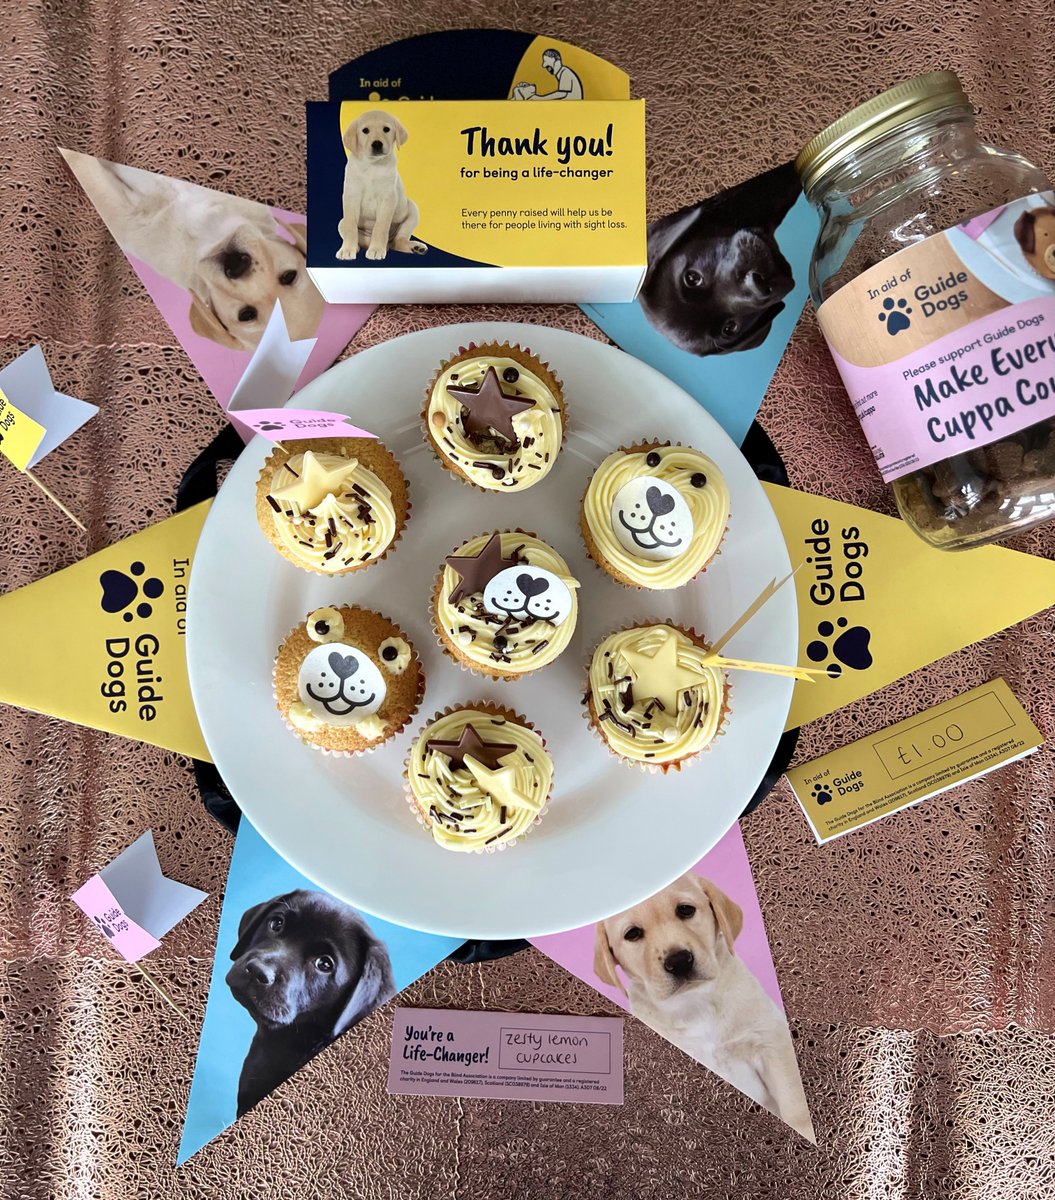 Are you hosting a tea party, coffee morning or bake sale to Make Every Cuppa Count this 19 April? ☕🧁

Sign up for your free fundraising pack which includes a Labrador shaped cookie cutter and dog nose cake toppers 👉🏼 bit.ly/3Pp0EGR

#MakeEveryCuppaCount